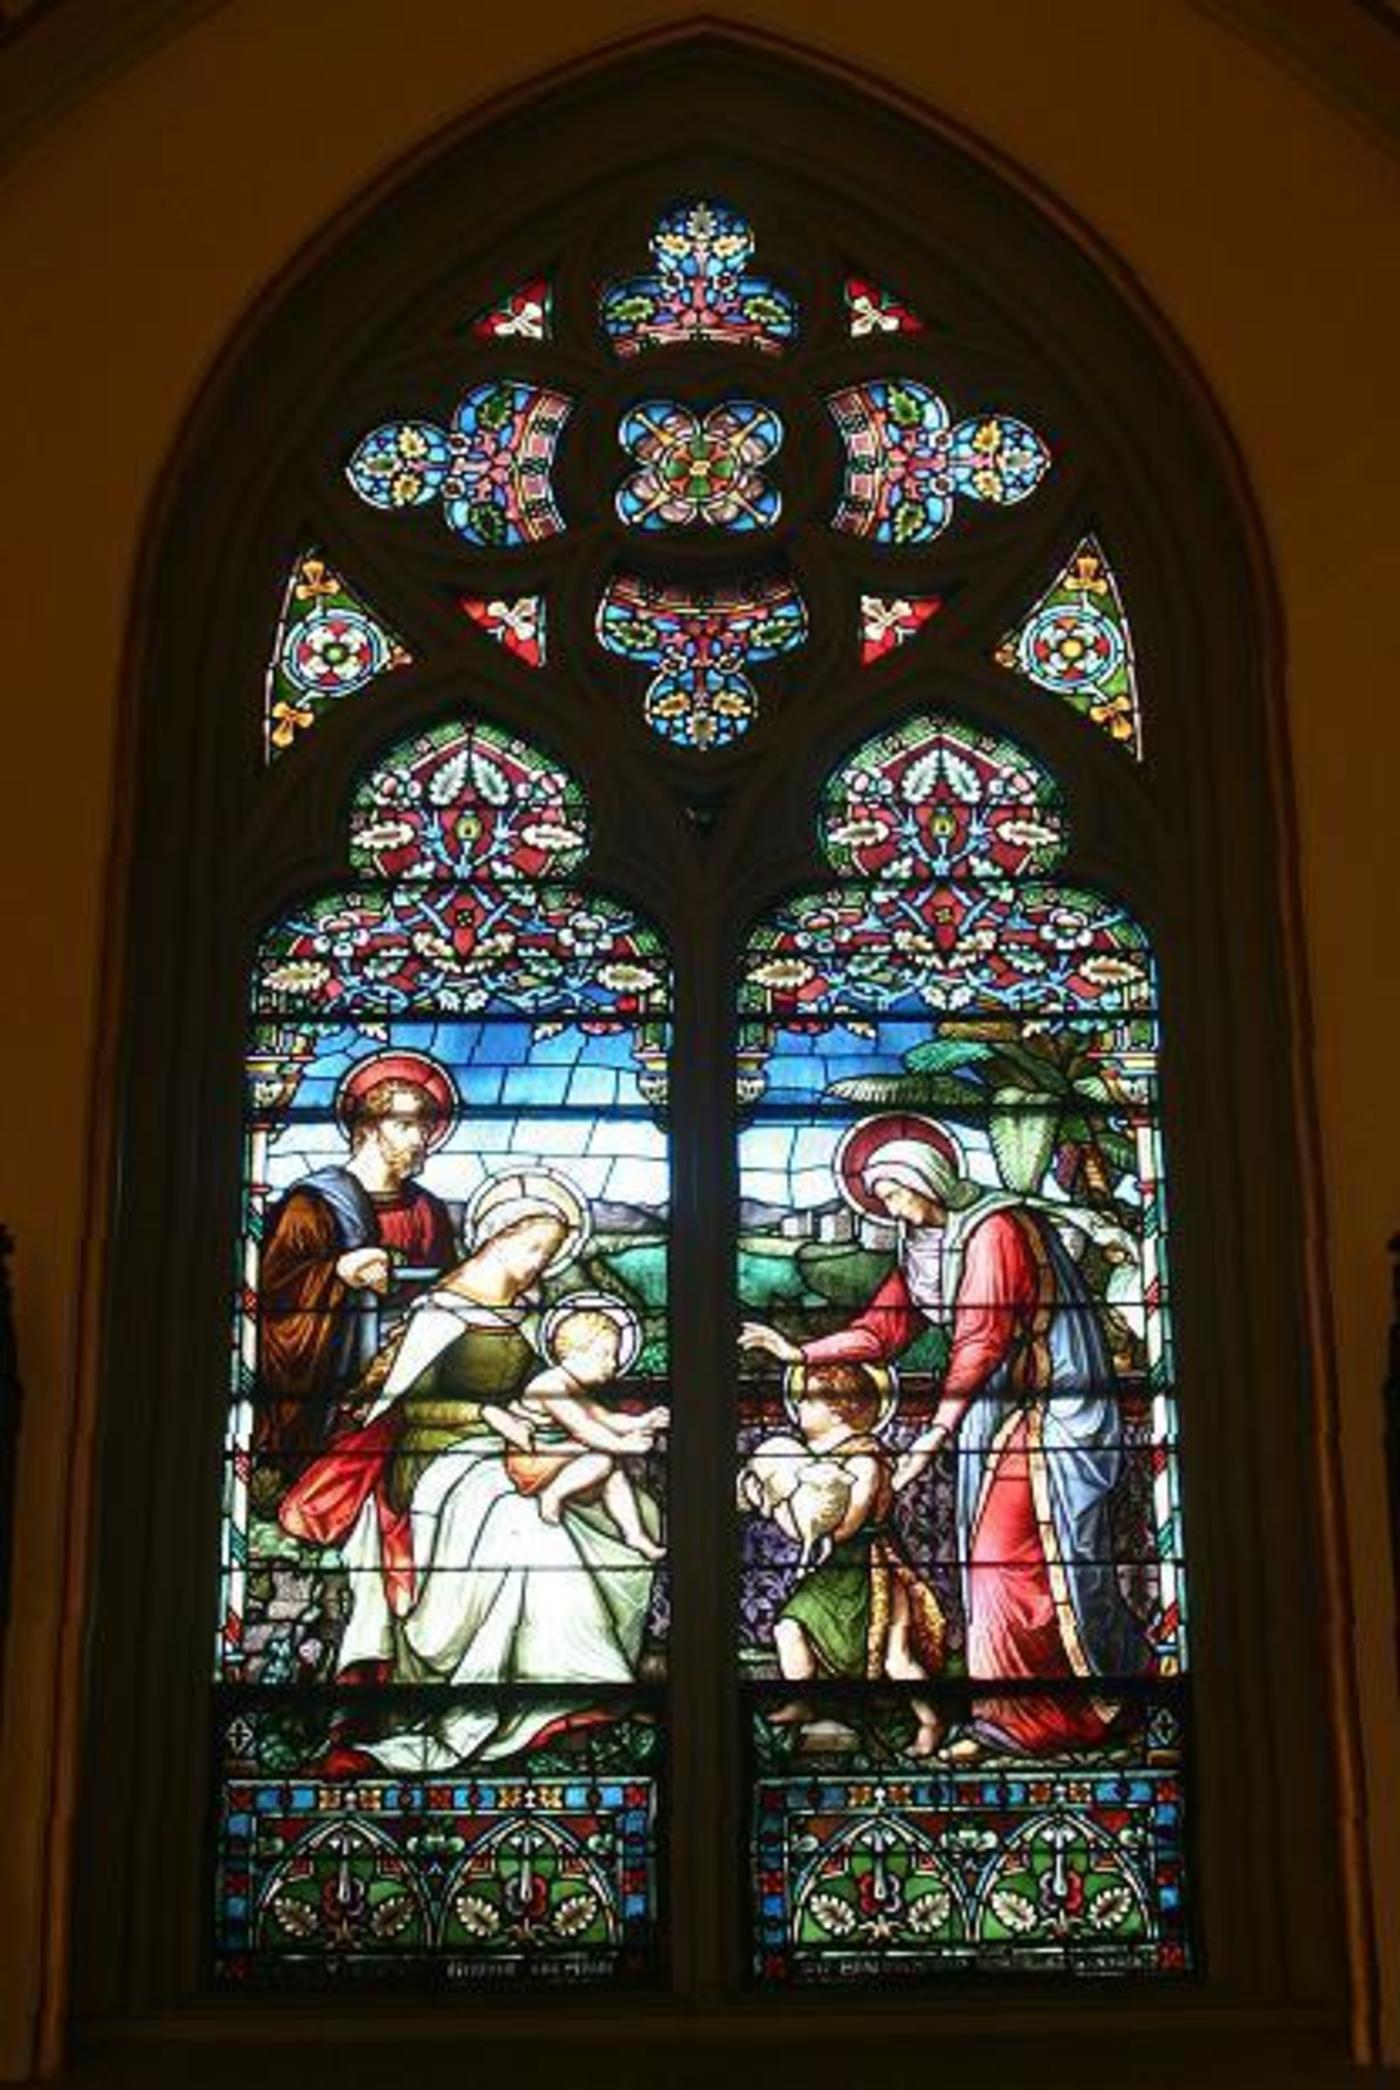 Windows 9A and 9B: The Holy Family, St. Elizabeth and the child St. John the Baptist